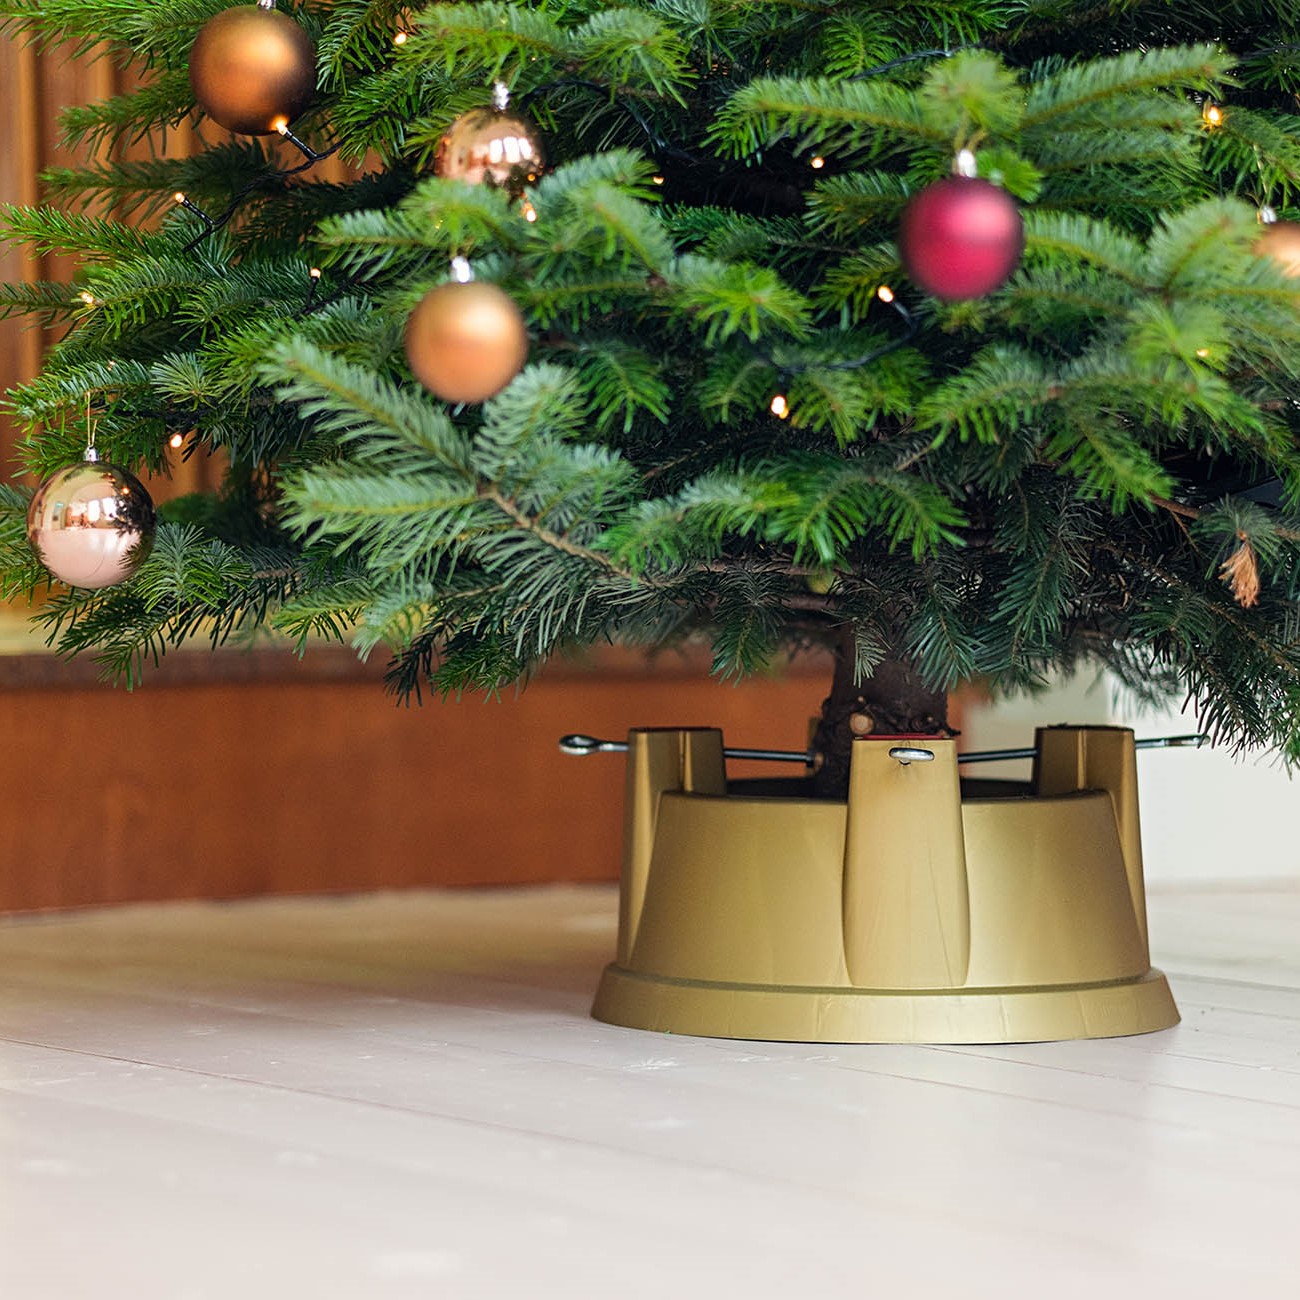 Keep a Christmas Tree from Falling Over or Leaning | Wobble Wedges